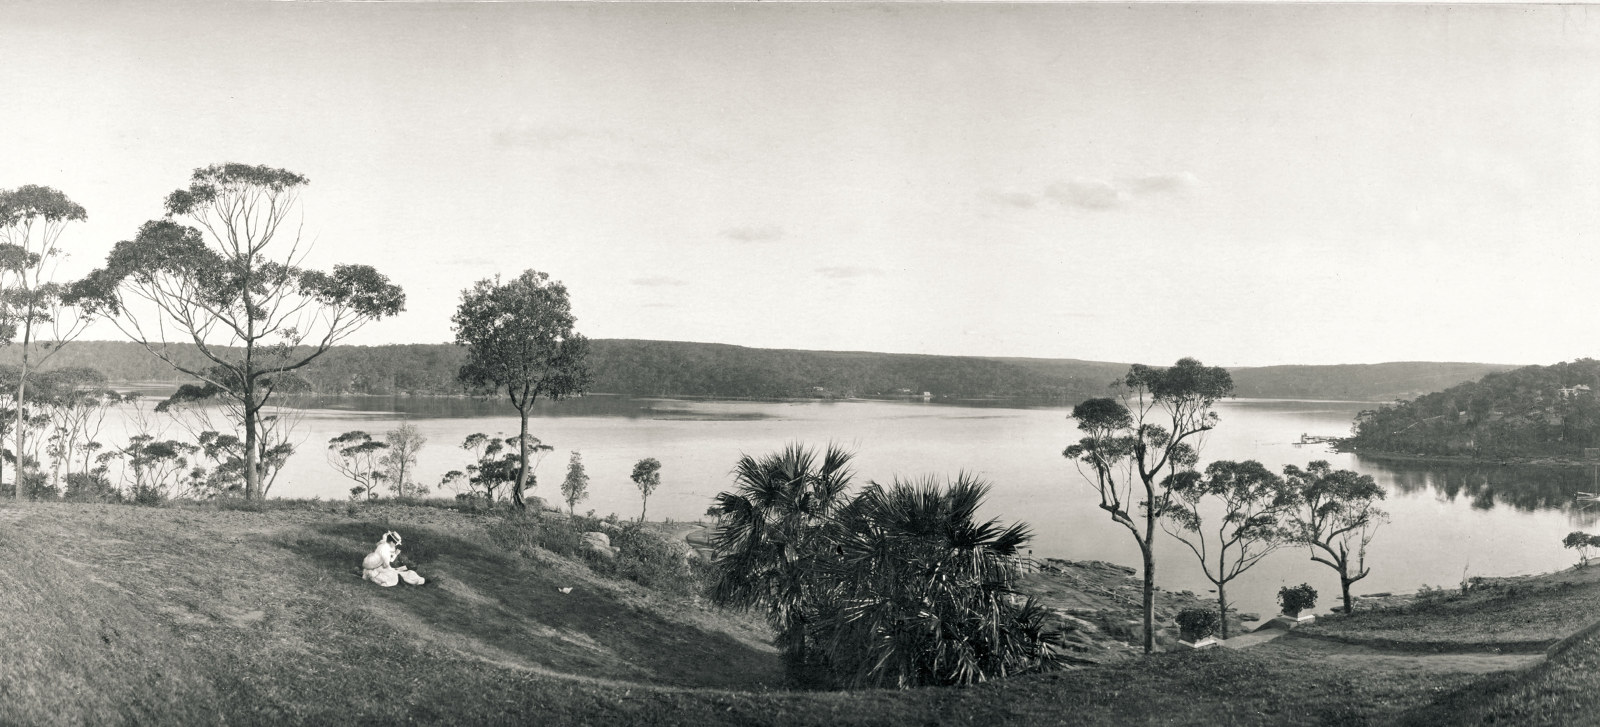 Panoramic image of the soft hills, lawn and view over the Port Hacking with a lady in white dress sitting in the foreground.